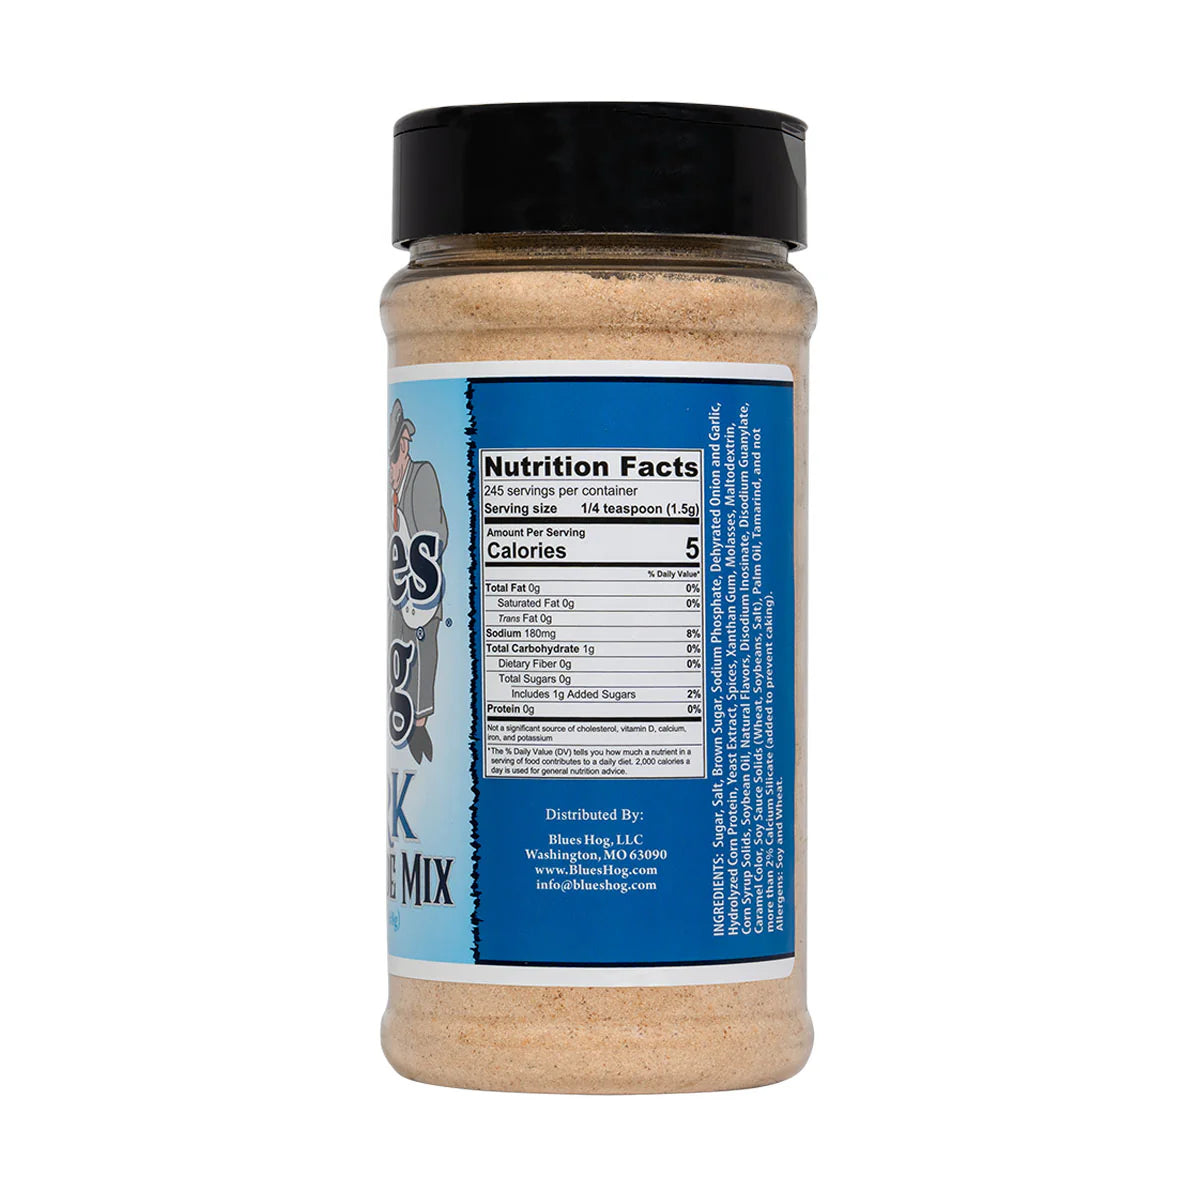 The side of a jar of Blues Hog Pork Marinade Mix with a black lid, showing the nutrition facts label. The label indicates 245 servings per container, with each serving size being 1/4 teaspoon (1.5g). The mix contains 5 calories, 0g total fat, 180mg sodium, 1g total carbohydrate, and 0g protein per serving. Ingredients include spices, salt, brown sugar, dehydrated garlic and onion, and more.